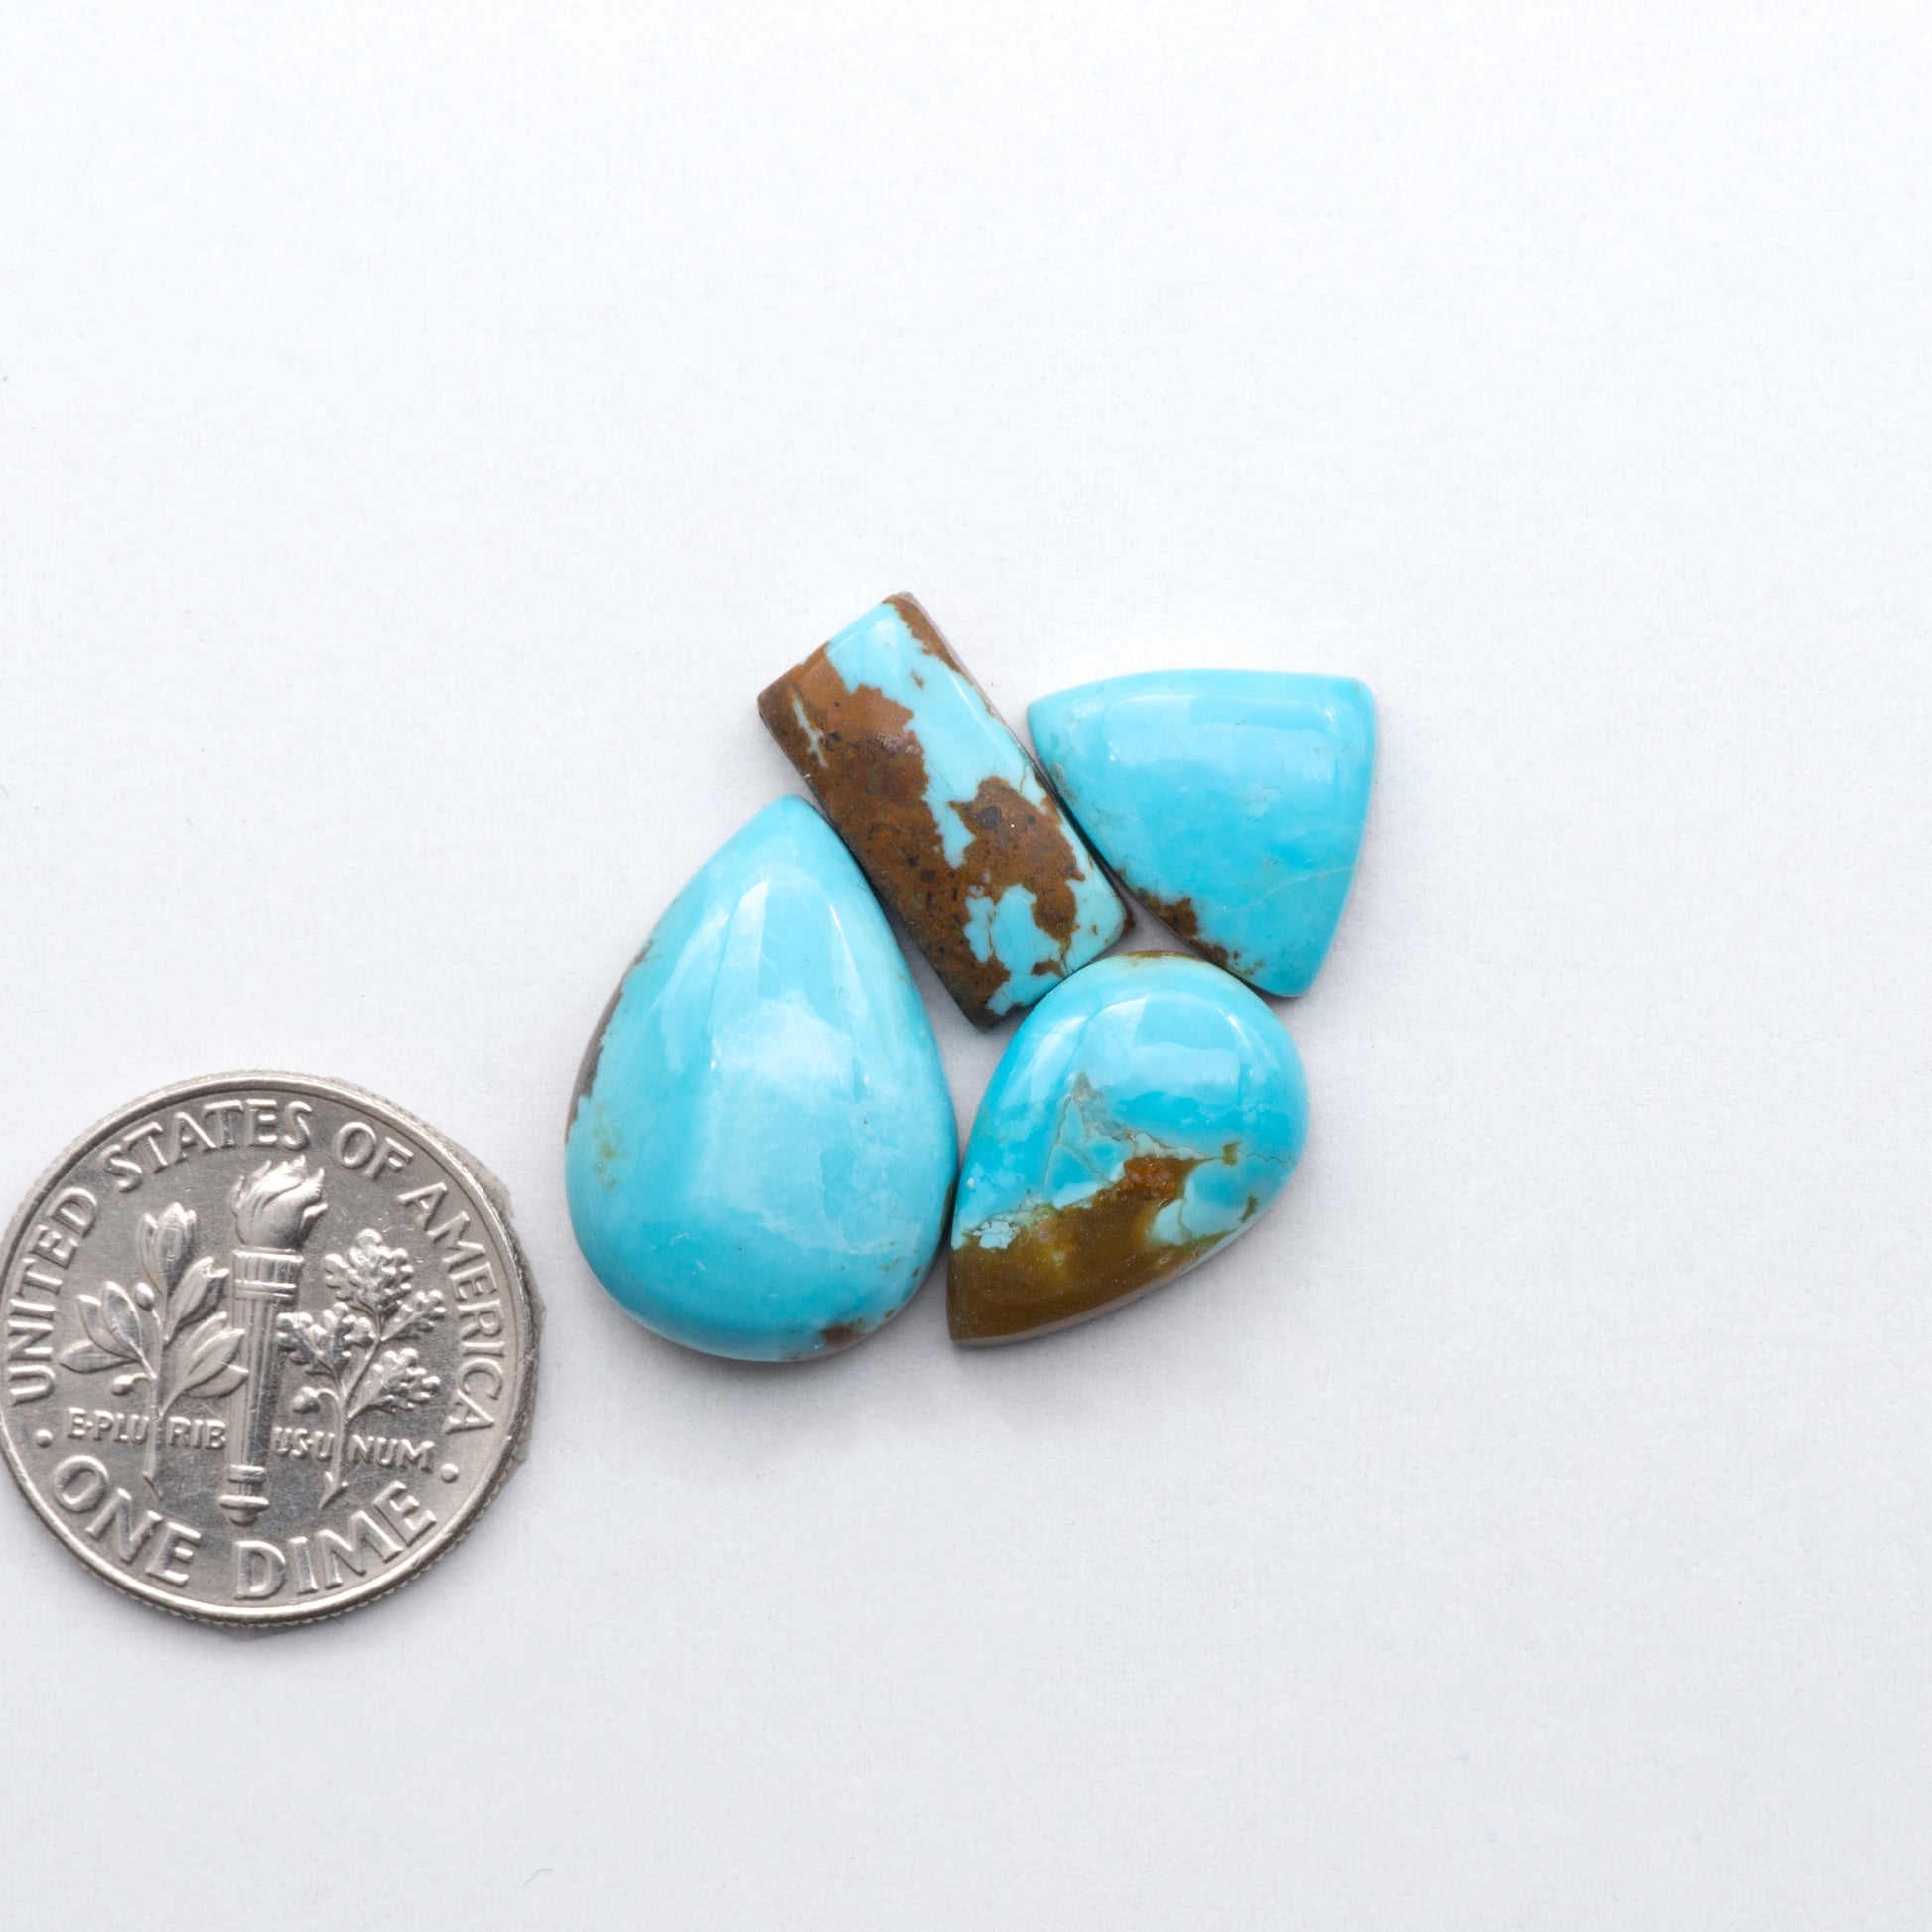 Campitos Turquoise offers cabochons crafted from authentic Campitos Turquoise from the mine in northern Mexico.